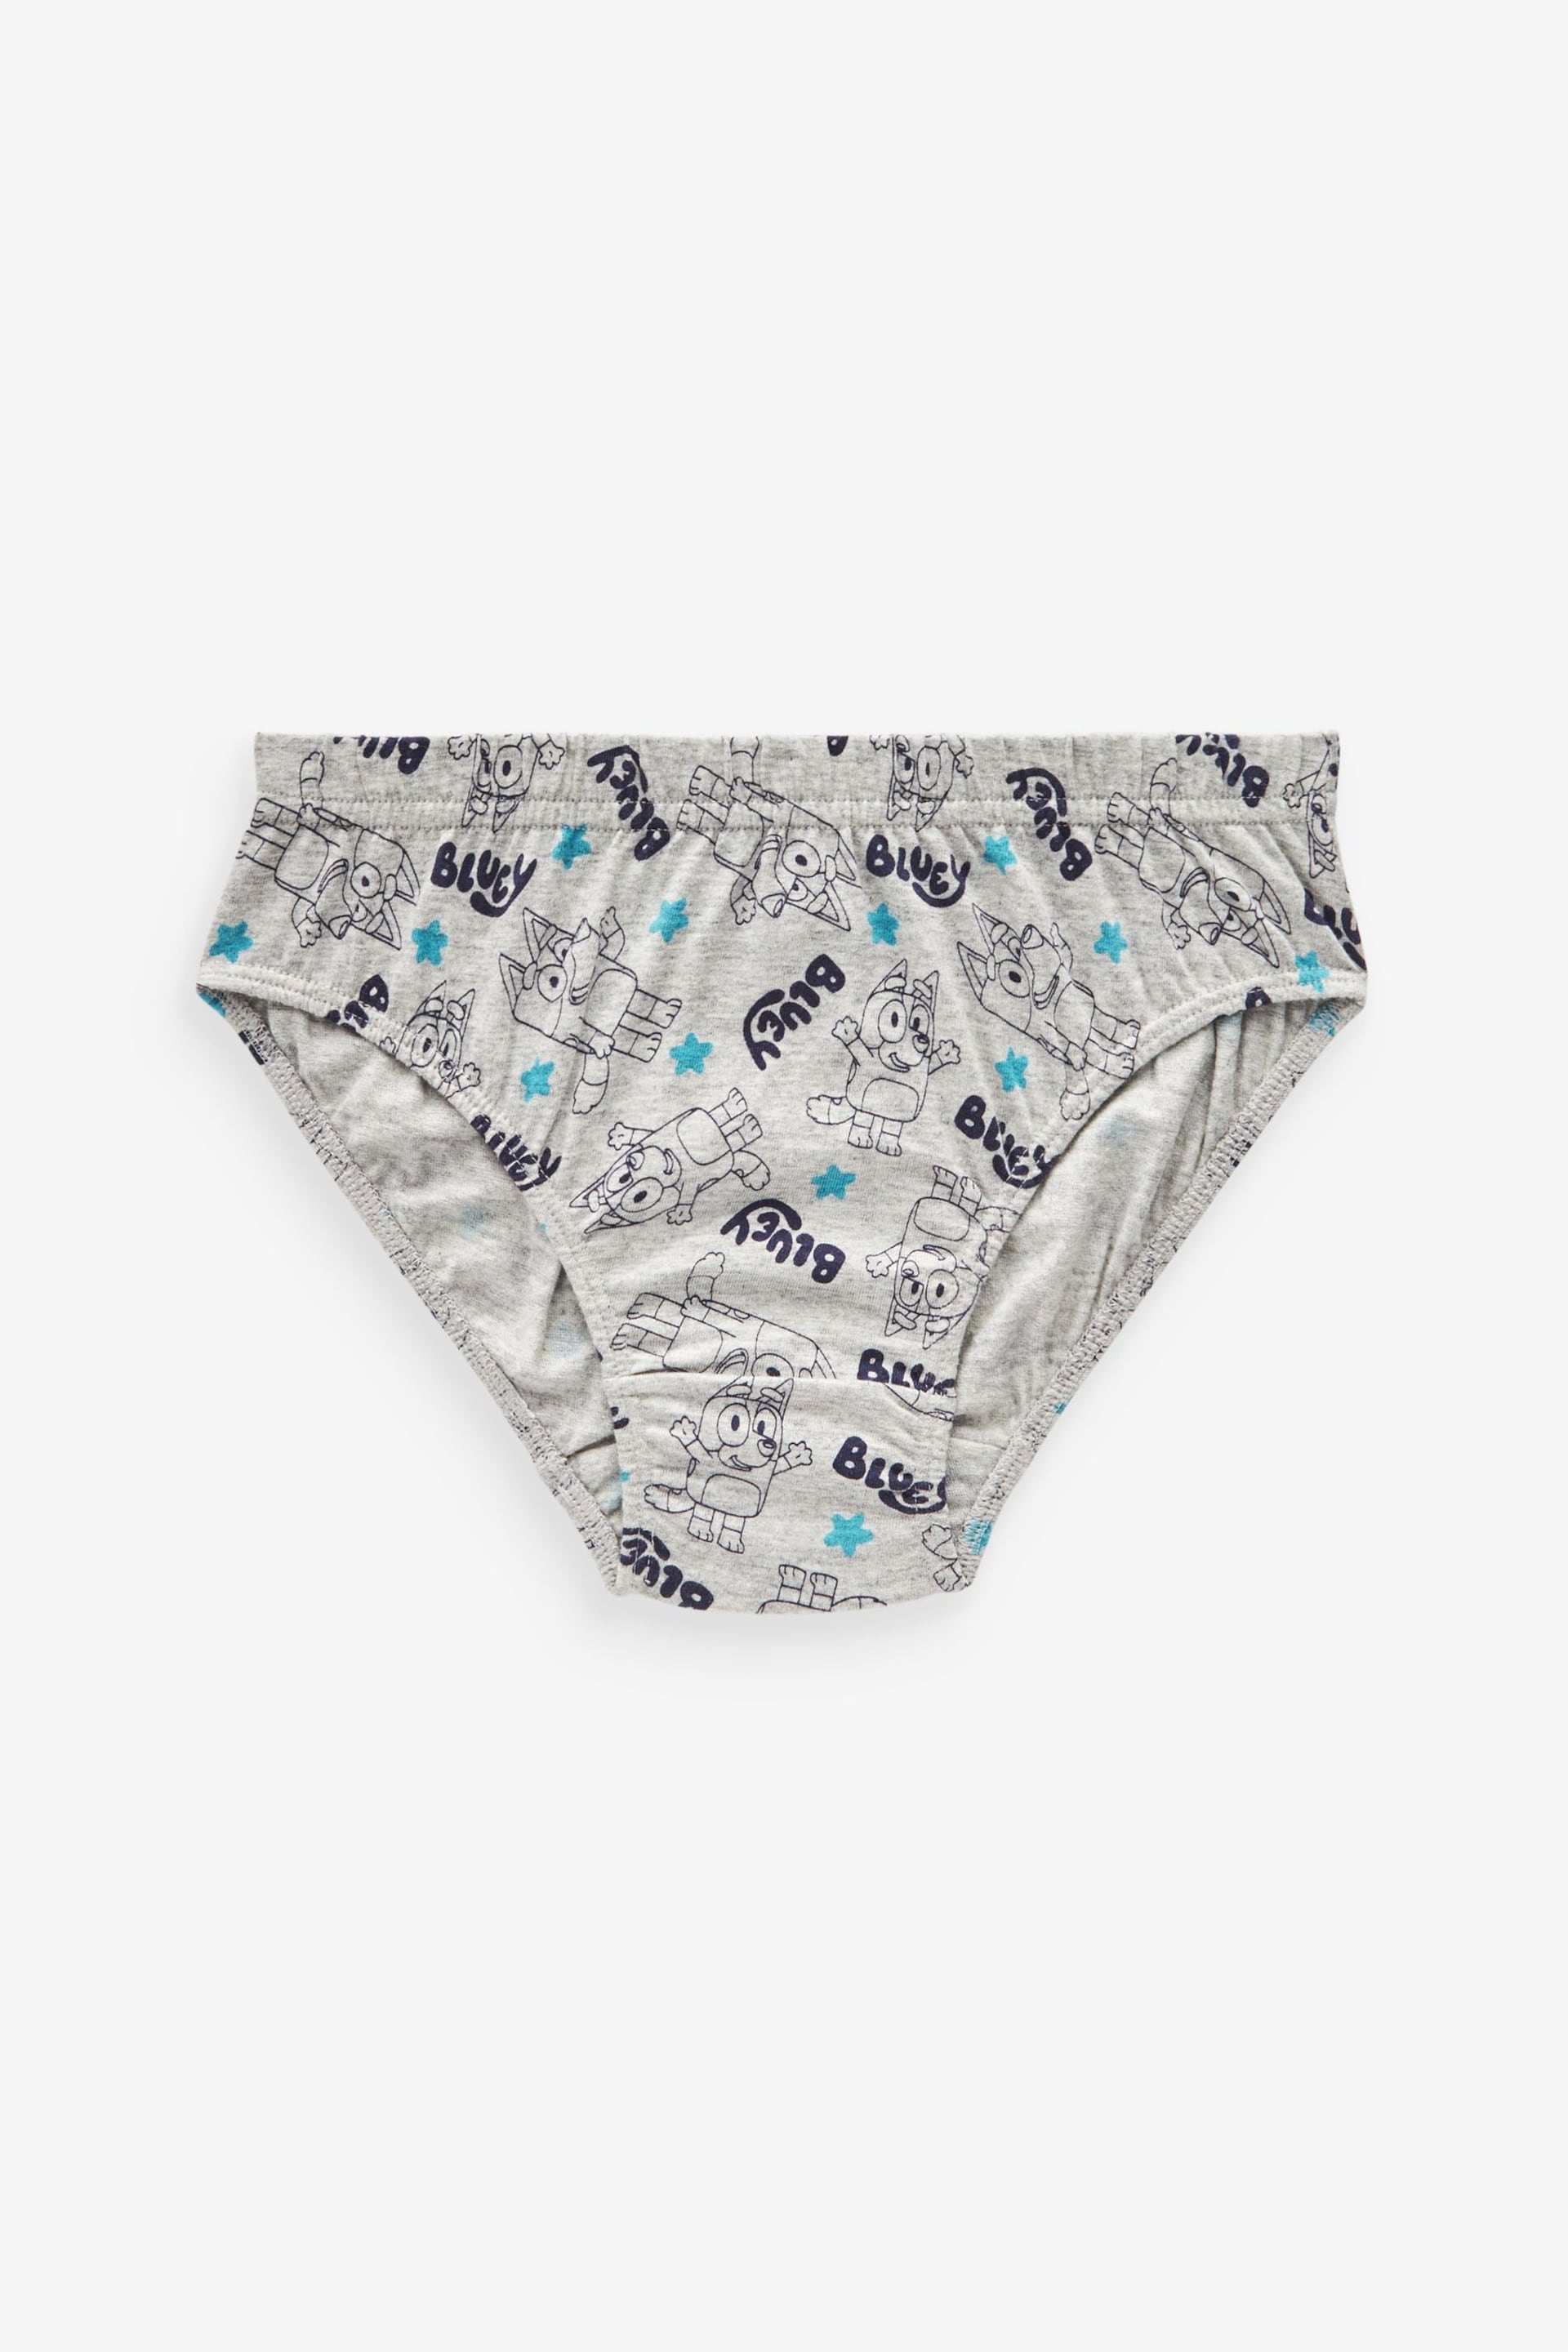 Bluey Briefs 5 Pack (1.5-10yrs) - Image 5 of 8